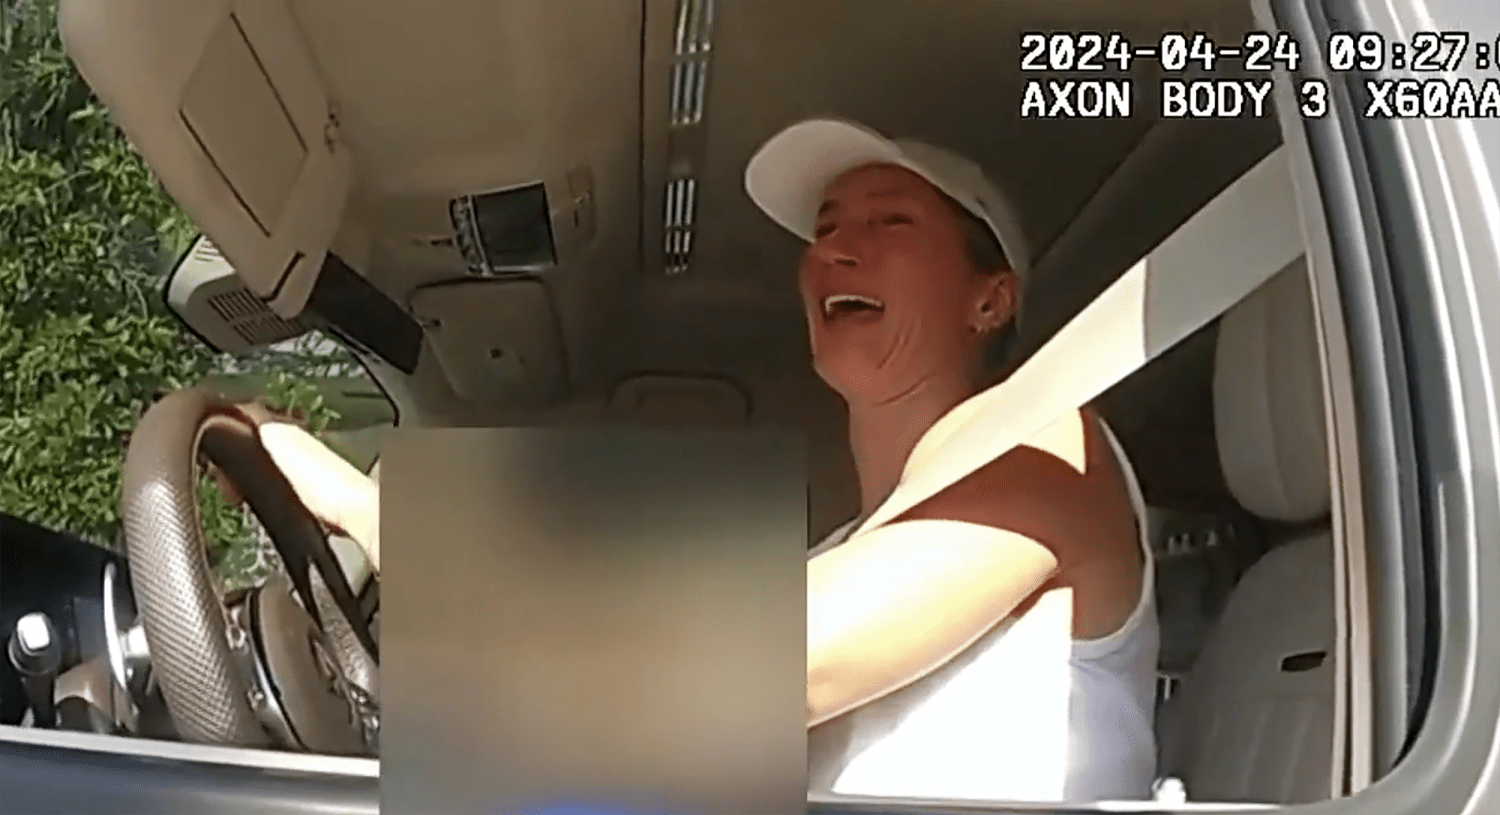 Gisele Bündchen breaks down in tears during Florida traffic stop while fleeing paparazzi